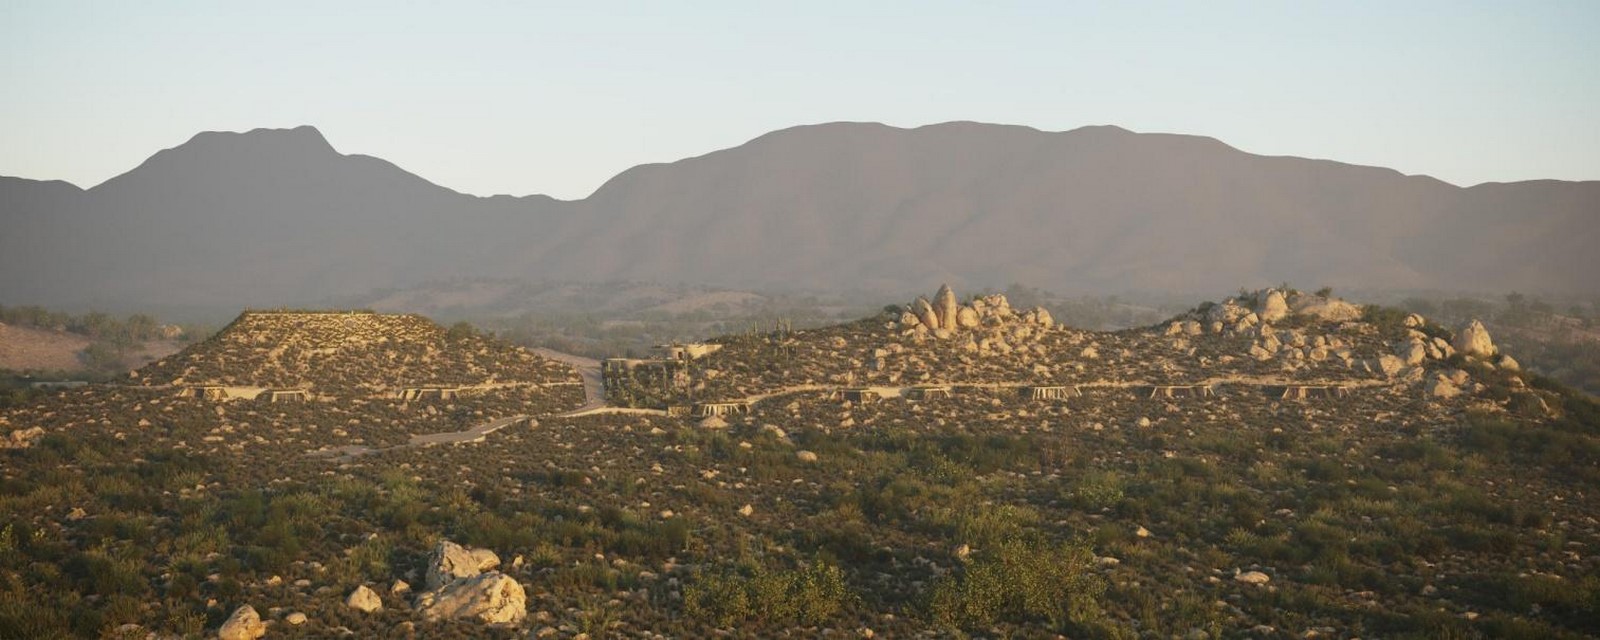 Ummara resort with 28 villas embedded in Mexican hills unveiled by Rojkind Arquitectos - Sheet2